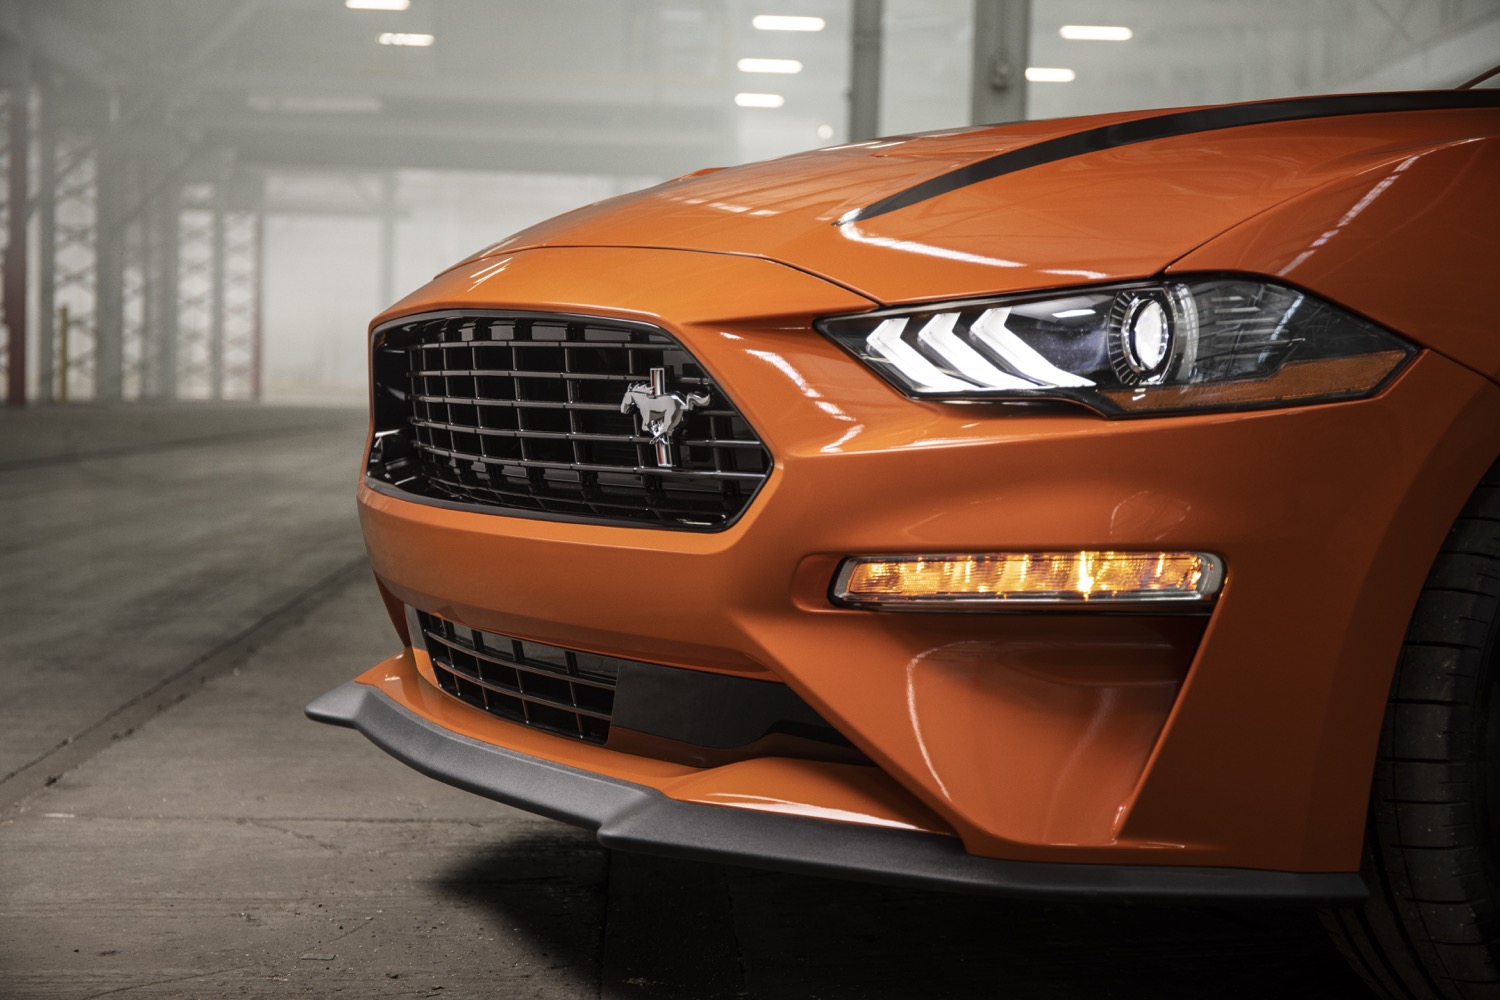 2020 Ford Mustang Fastback EcoBoost High Performance Package - Exterior 006 front end and grille with pony logo